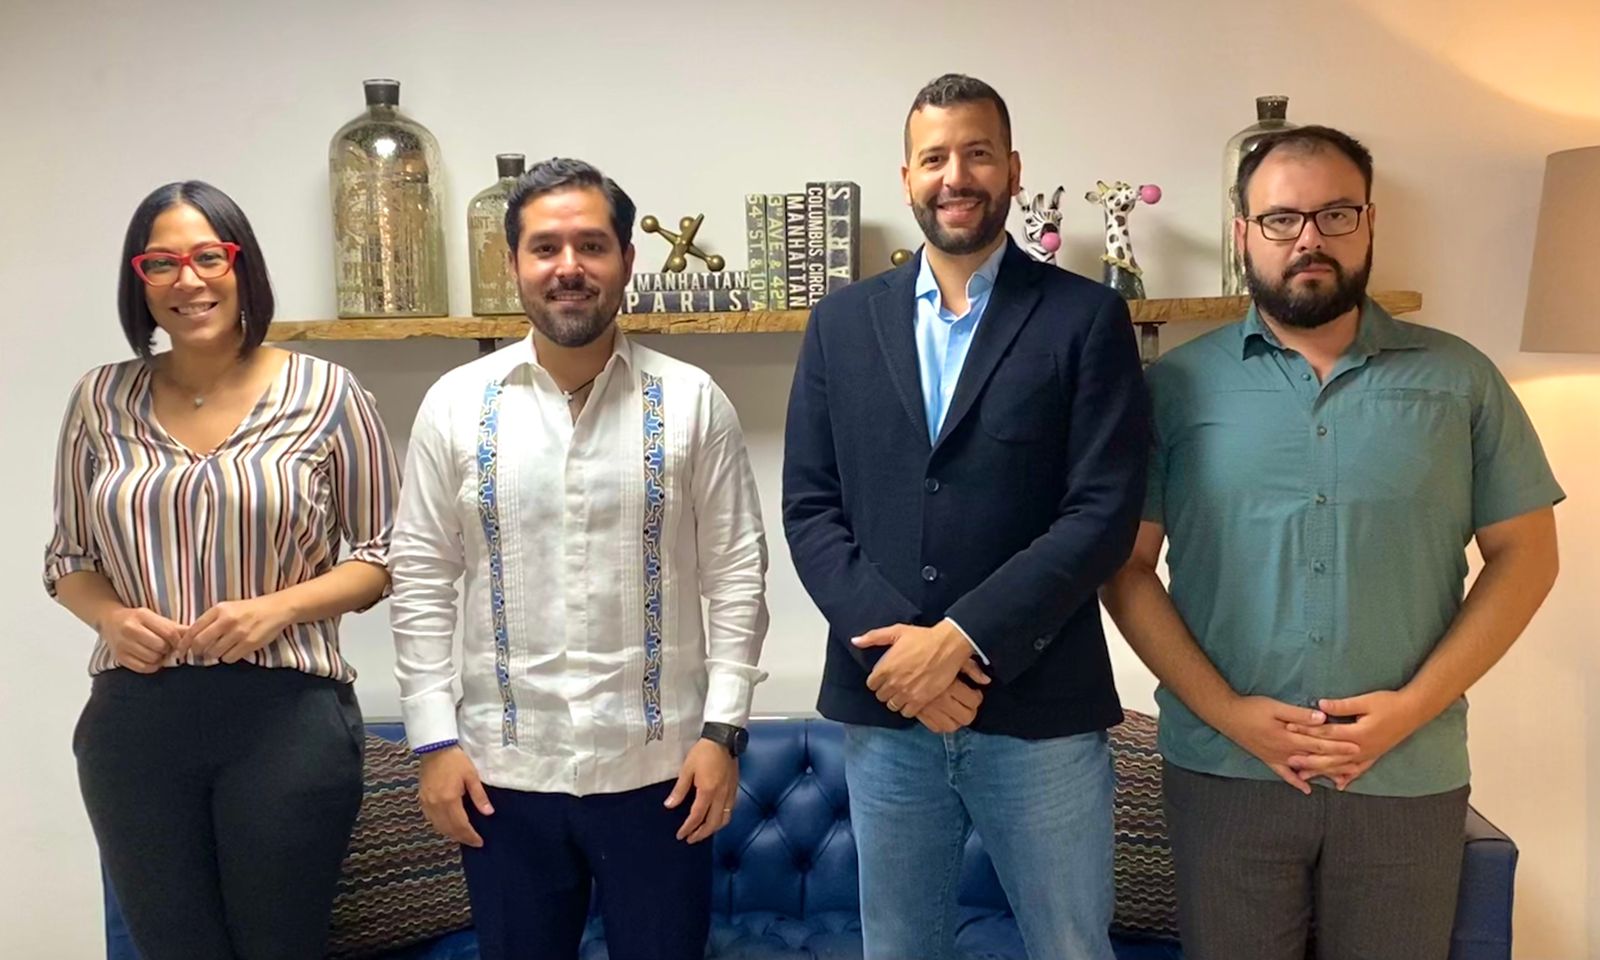 Lizzie González, Executive Director of ASOFER; Rodrigo Sotelo, Sr. Sales Manager Utility for LONGi Mexico and CAMCAR; Marvin Fernández, President of ASOFER; and Israel Sánchez, Product & Solution Manager for LONGi LATAM